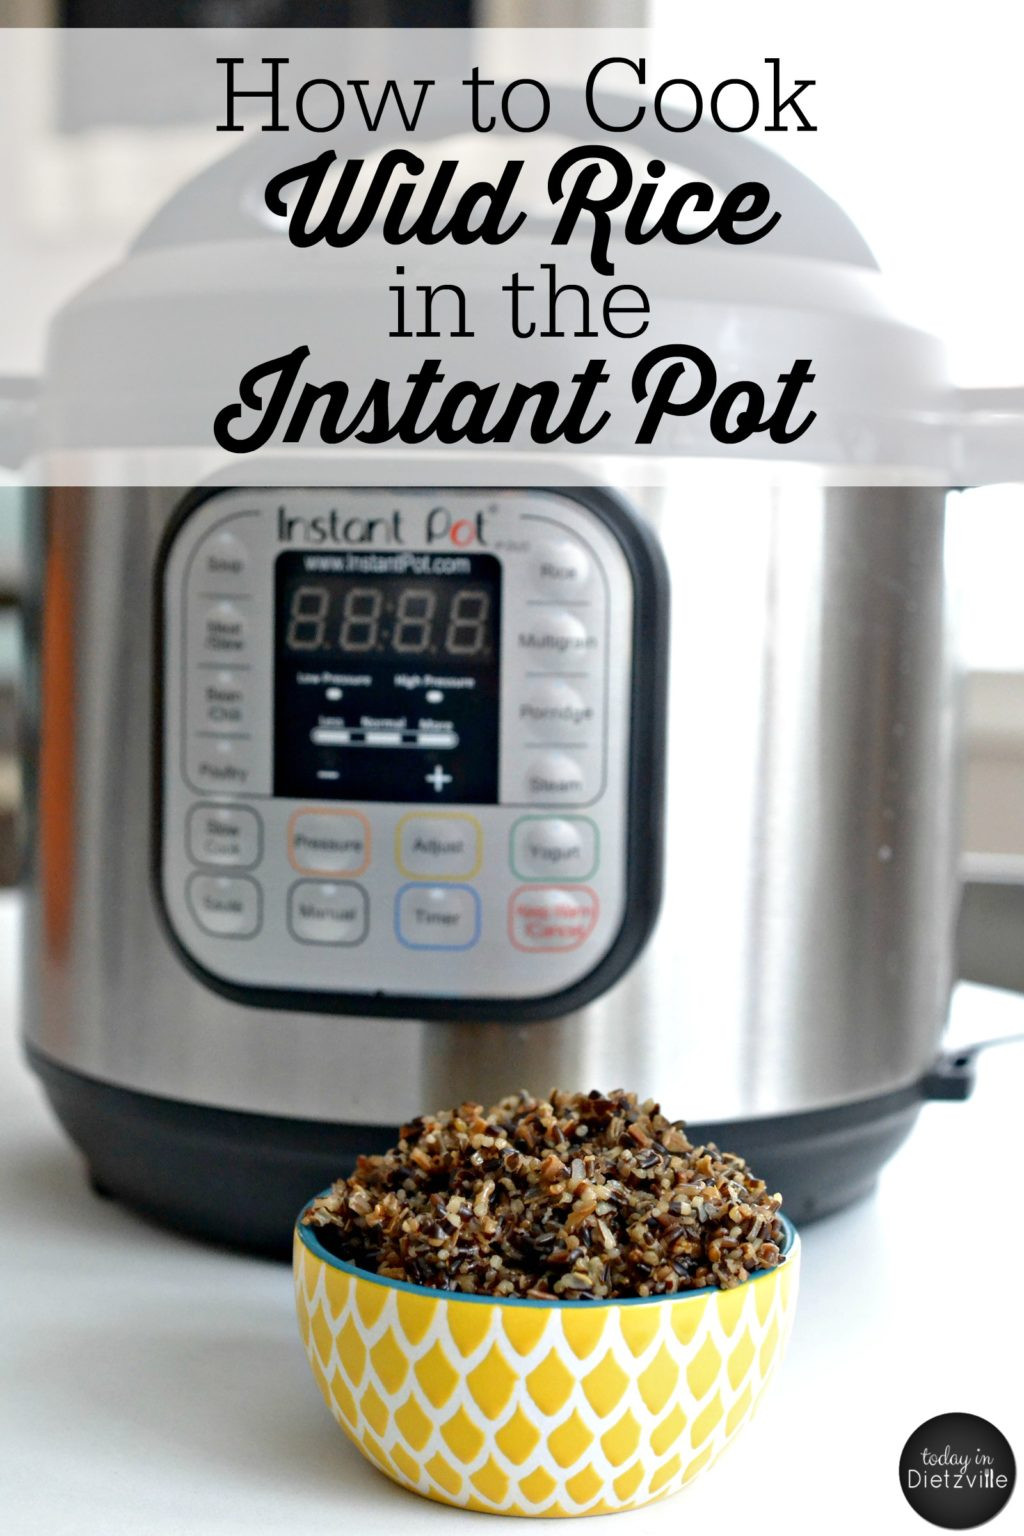 Microwave Wild Rice
 How To Cook Wild Rice In The Instant Pot